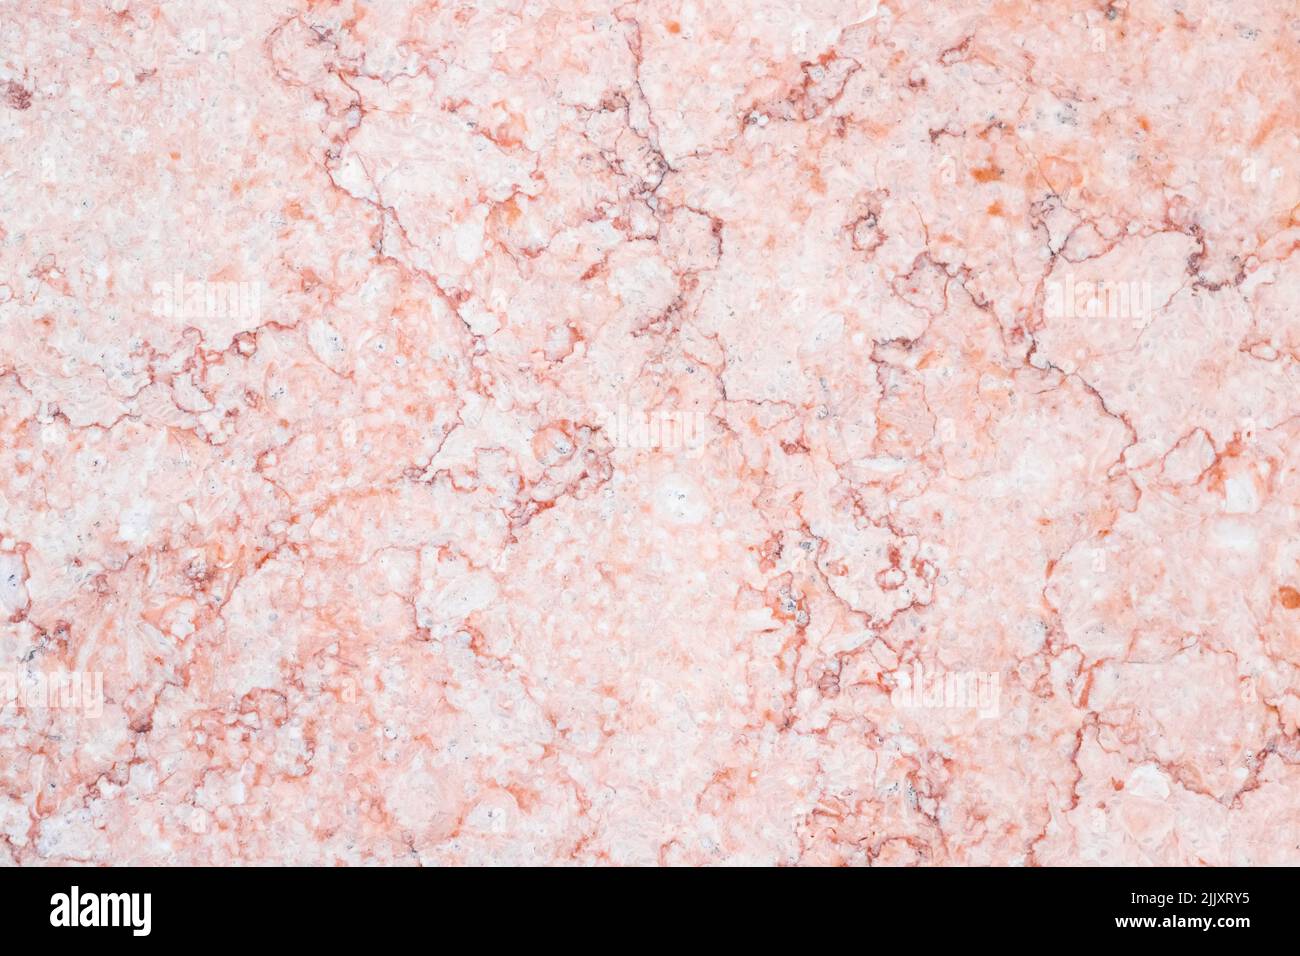 Pink marble pattern. Close-up photo texture. Natural stone plate background, front view Stock Photo